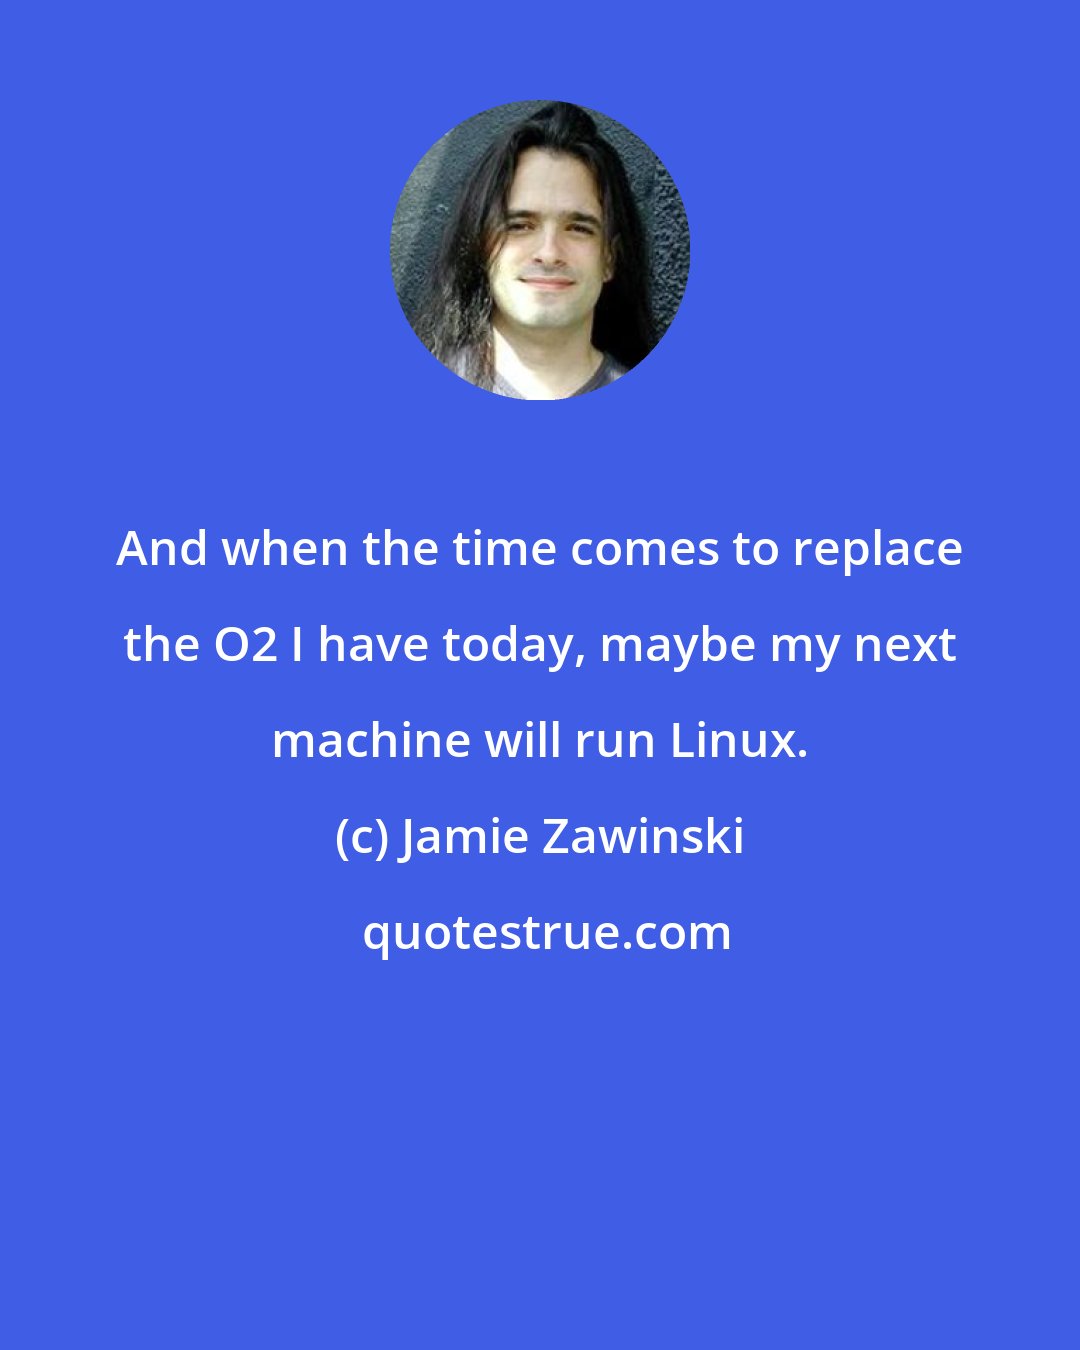 Jamie Zawinski: And when the time comes to replace the O2 I have today, maybe my next machine will run Linux.